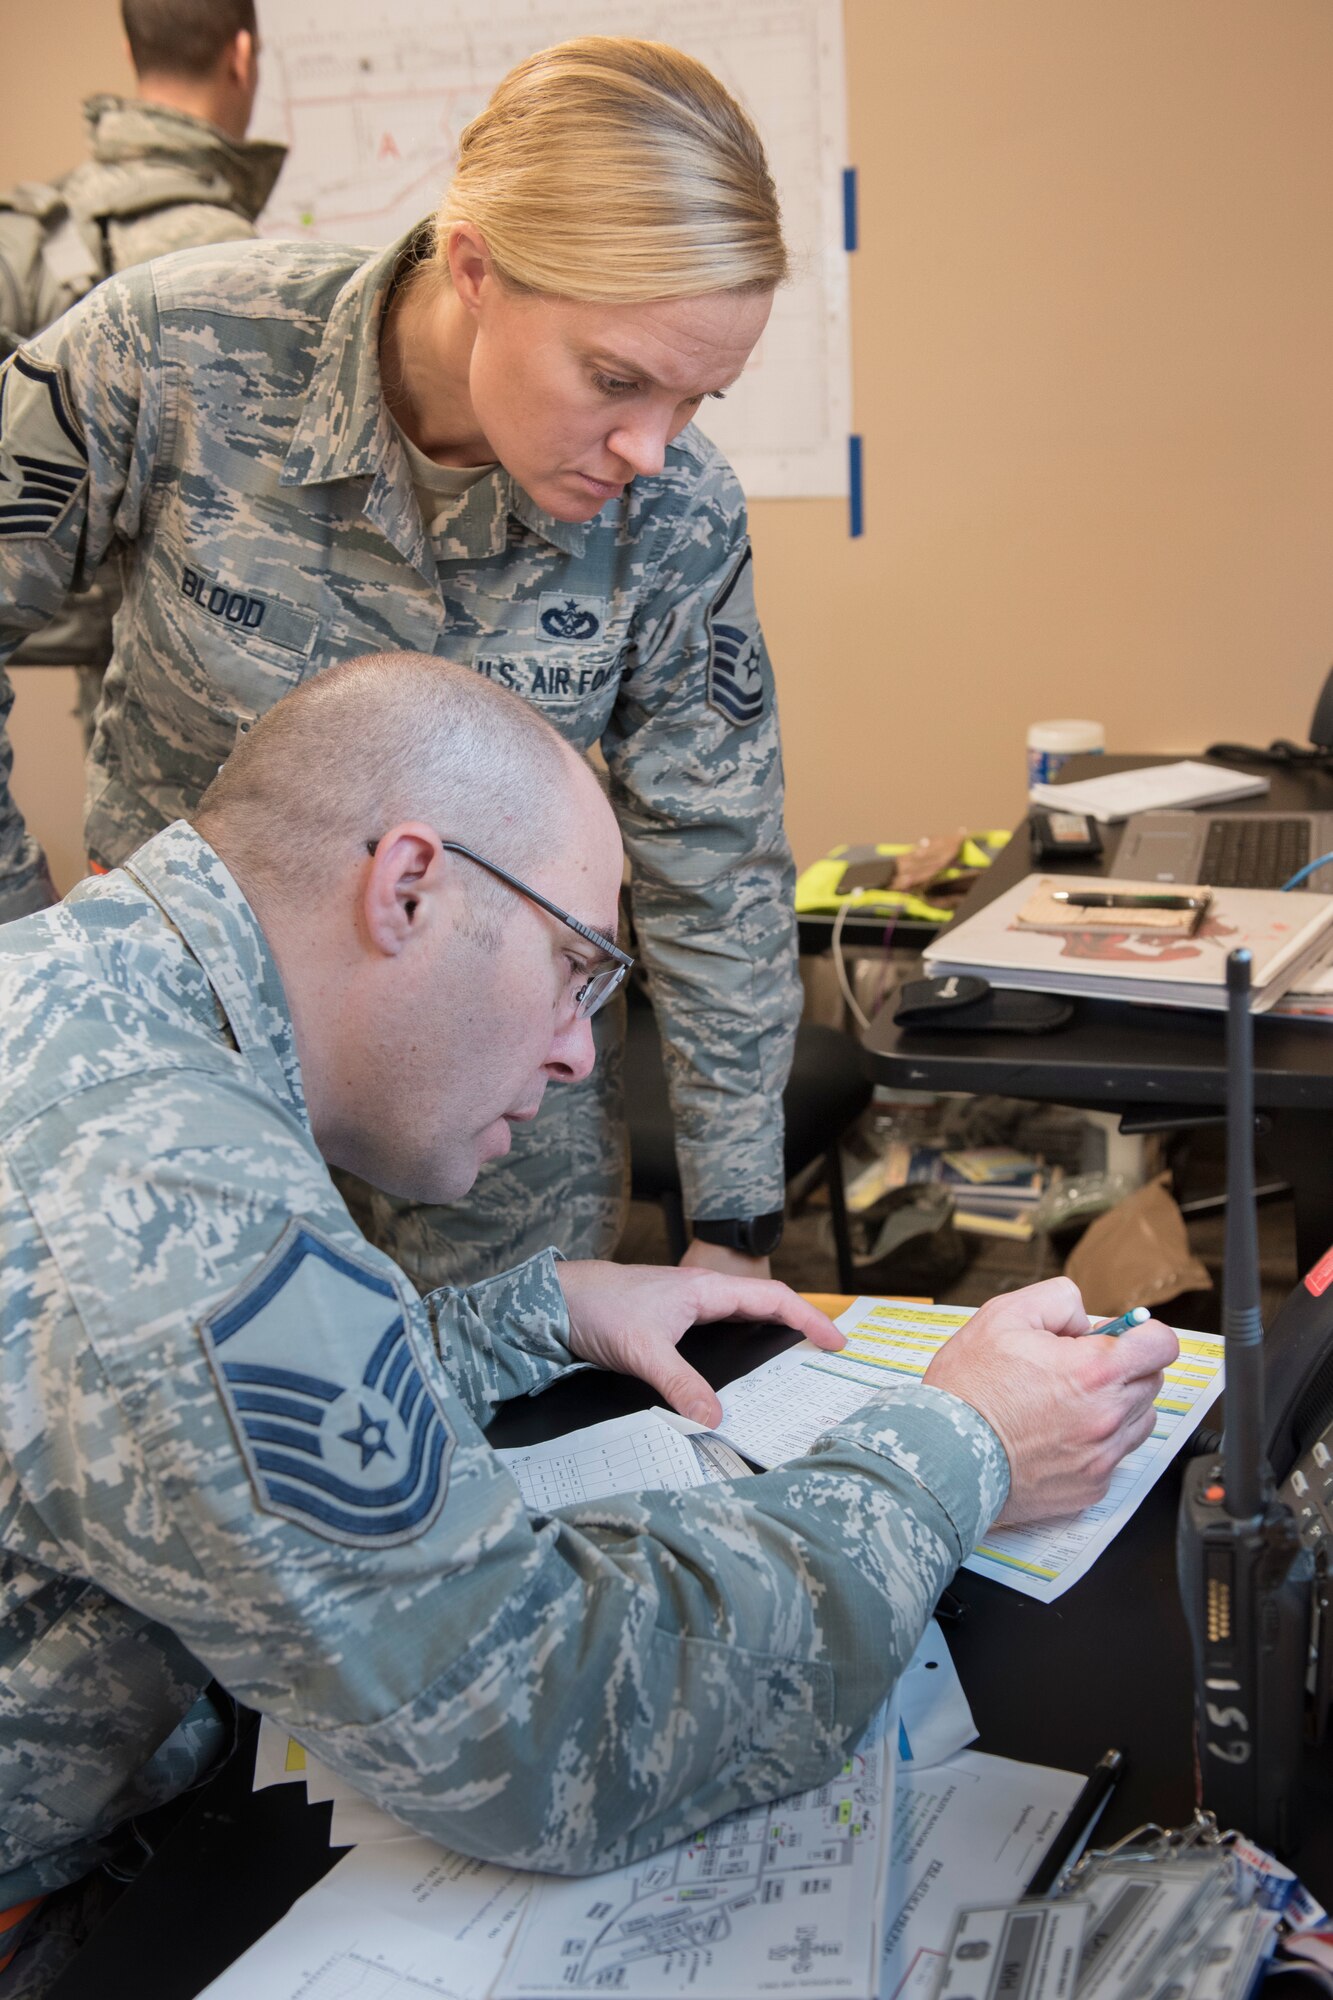 Master Sgt. Jennifer Blood, 167th Airlift Wing emergency managment, and Master Sgt. Anthony Perkins, 167th AW inspections superintendent, look over the schedule of events list for a full-scale readiness exercise, Nov. 4 2019. Approximately 300 members of the 167th Airlift Wing deployed to the Combat Readiness Training Center in Alpena, Mich., Nov. 3-7, for the event.(U.S. Air National Guard photo by Senior Master Sgt. Emily Beightol-Deyerle)